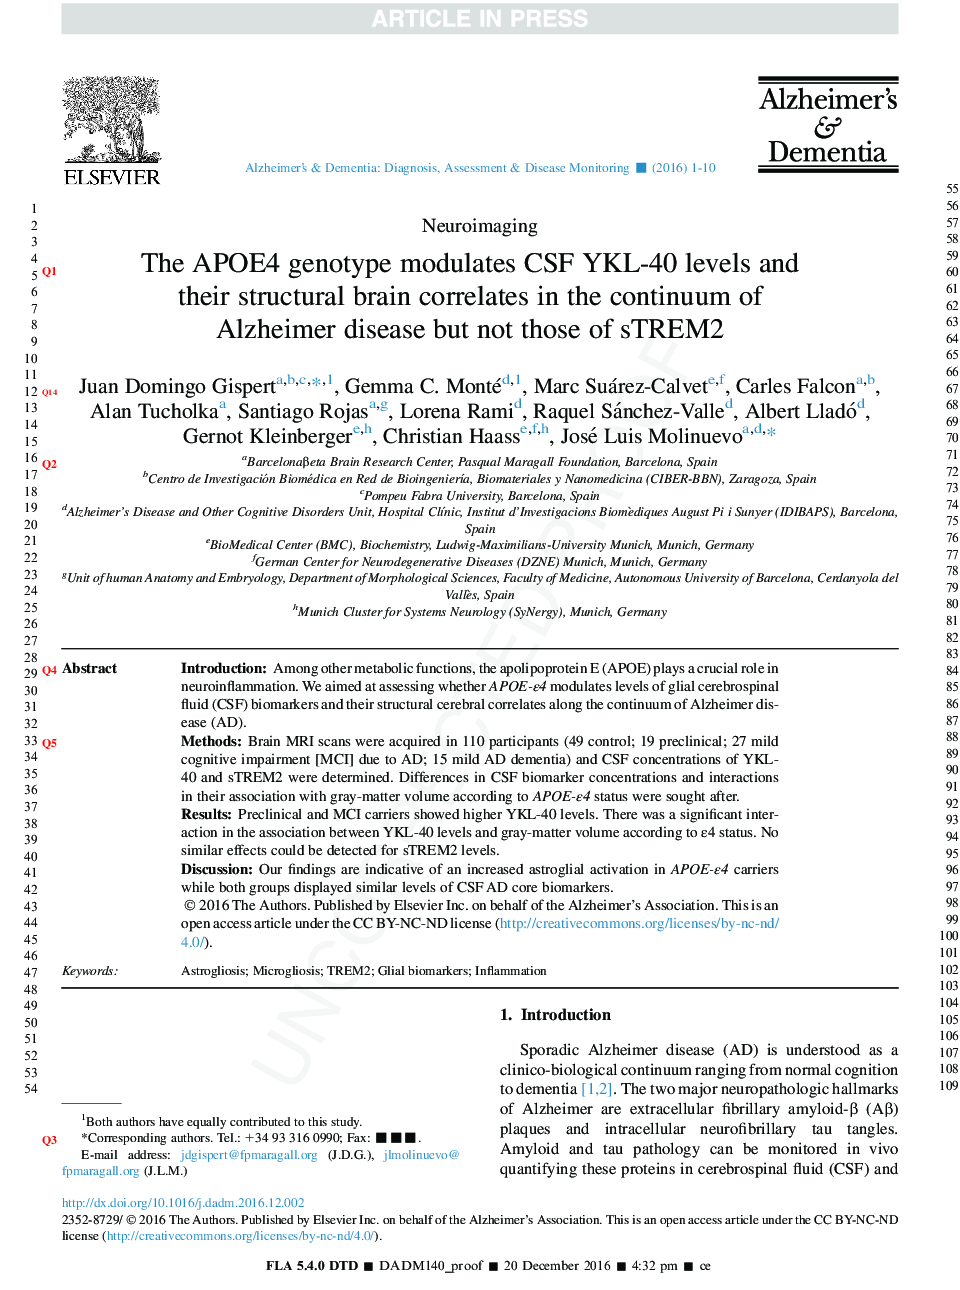 The APOE Îµ4 genotype modulates CSF YKL-40 levels and their structural brain correlates in the continuum of Alzheimer's disease but not those of sTREM2